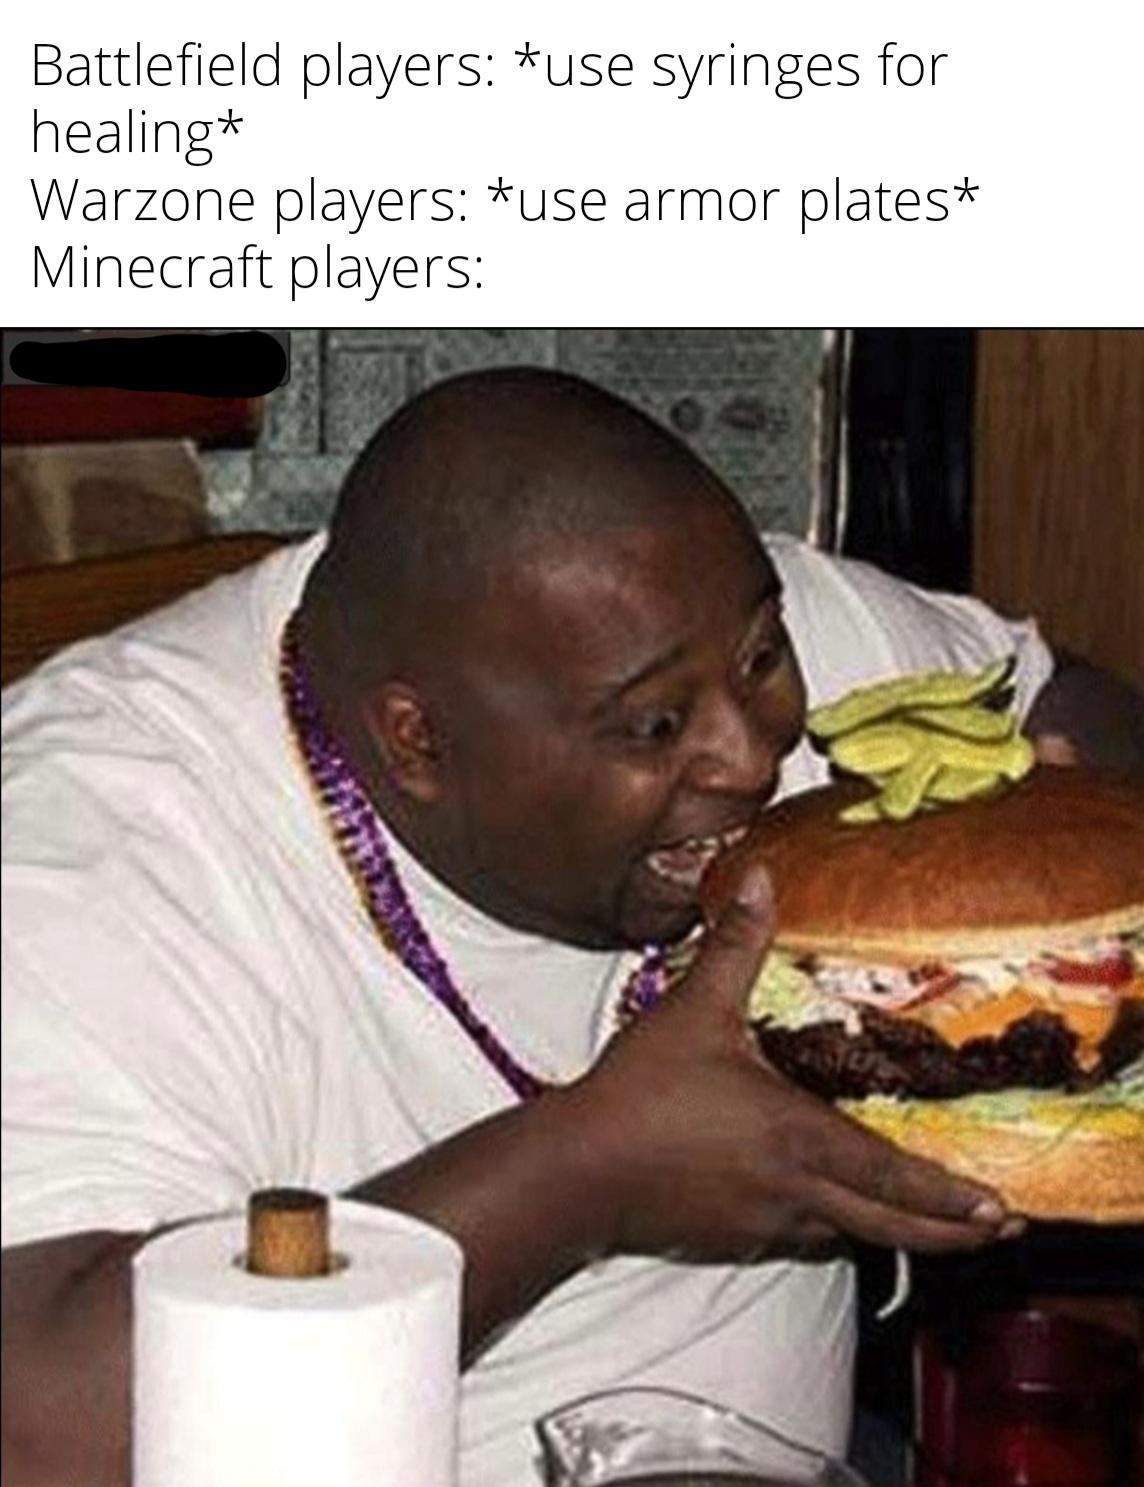 funny gaming memes - burger eating man - Battlefield players use syringes for healing Warzone players use armor plates Minecraft players